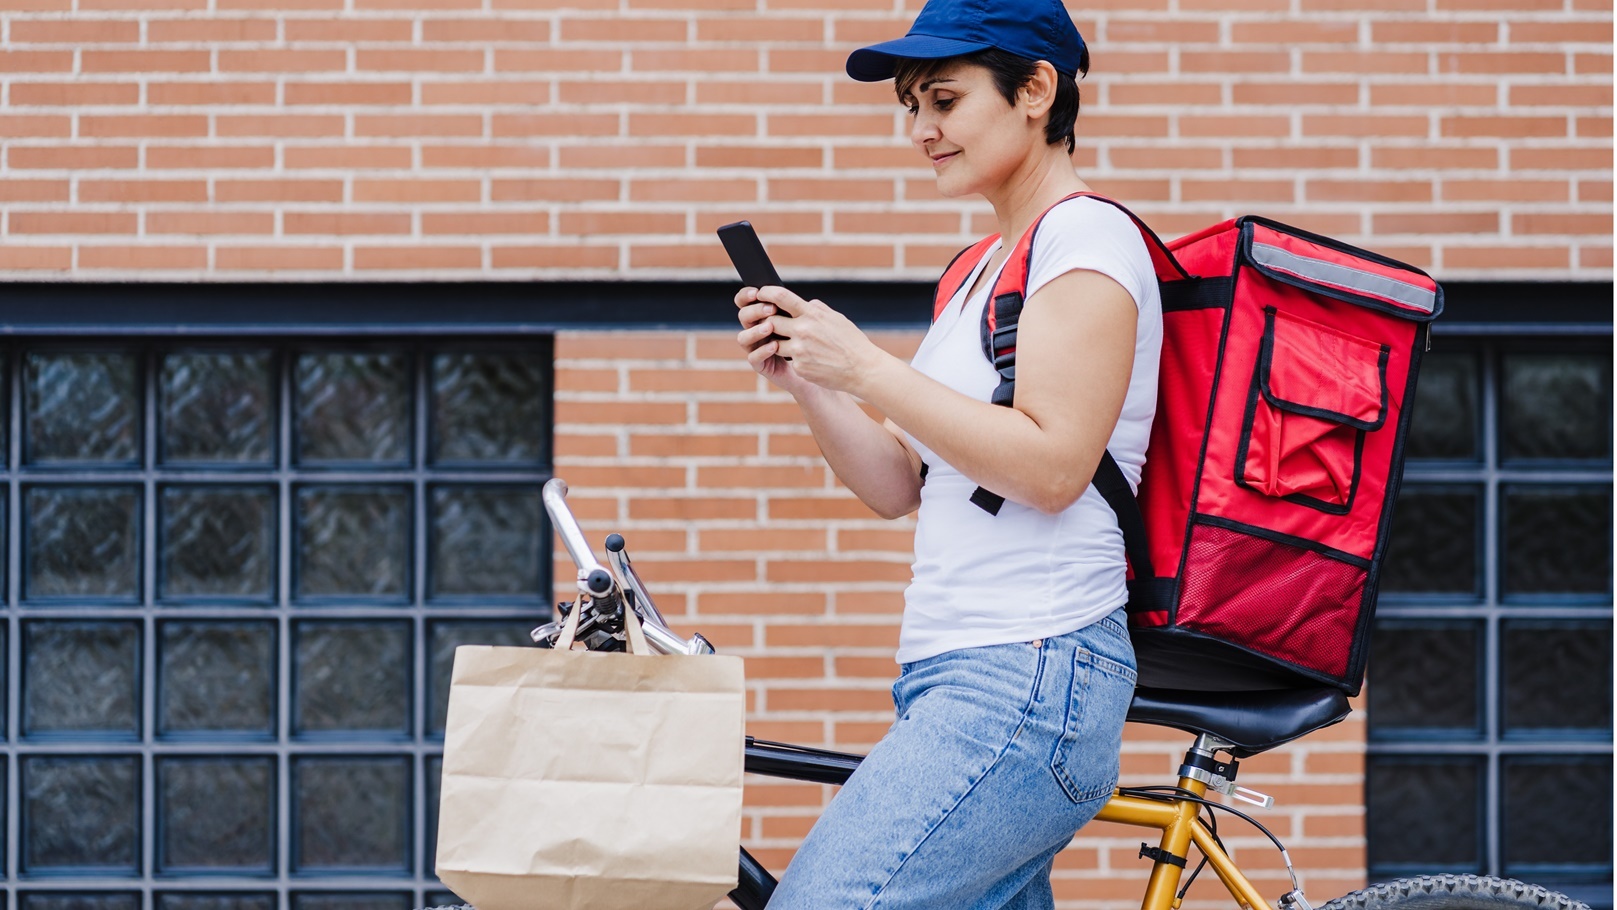 woman-with-red-backpack-holding-bag-of-food-in-cit-2022-02-16-22-28-23-utc